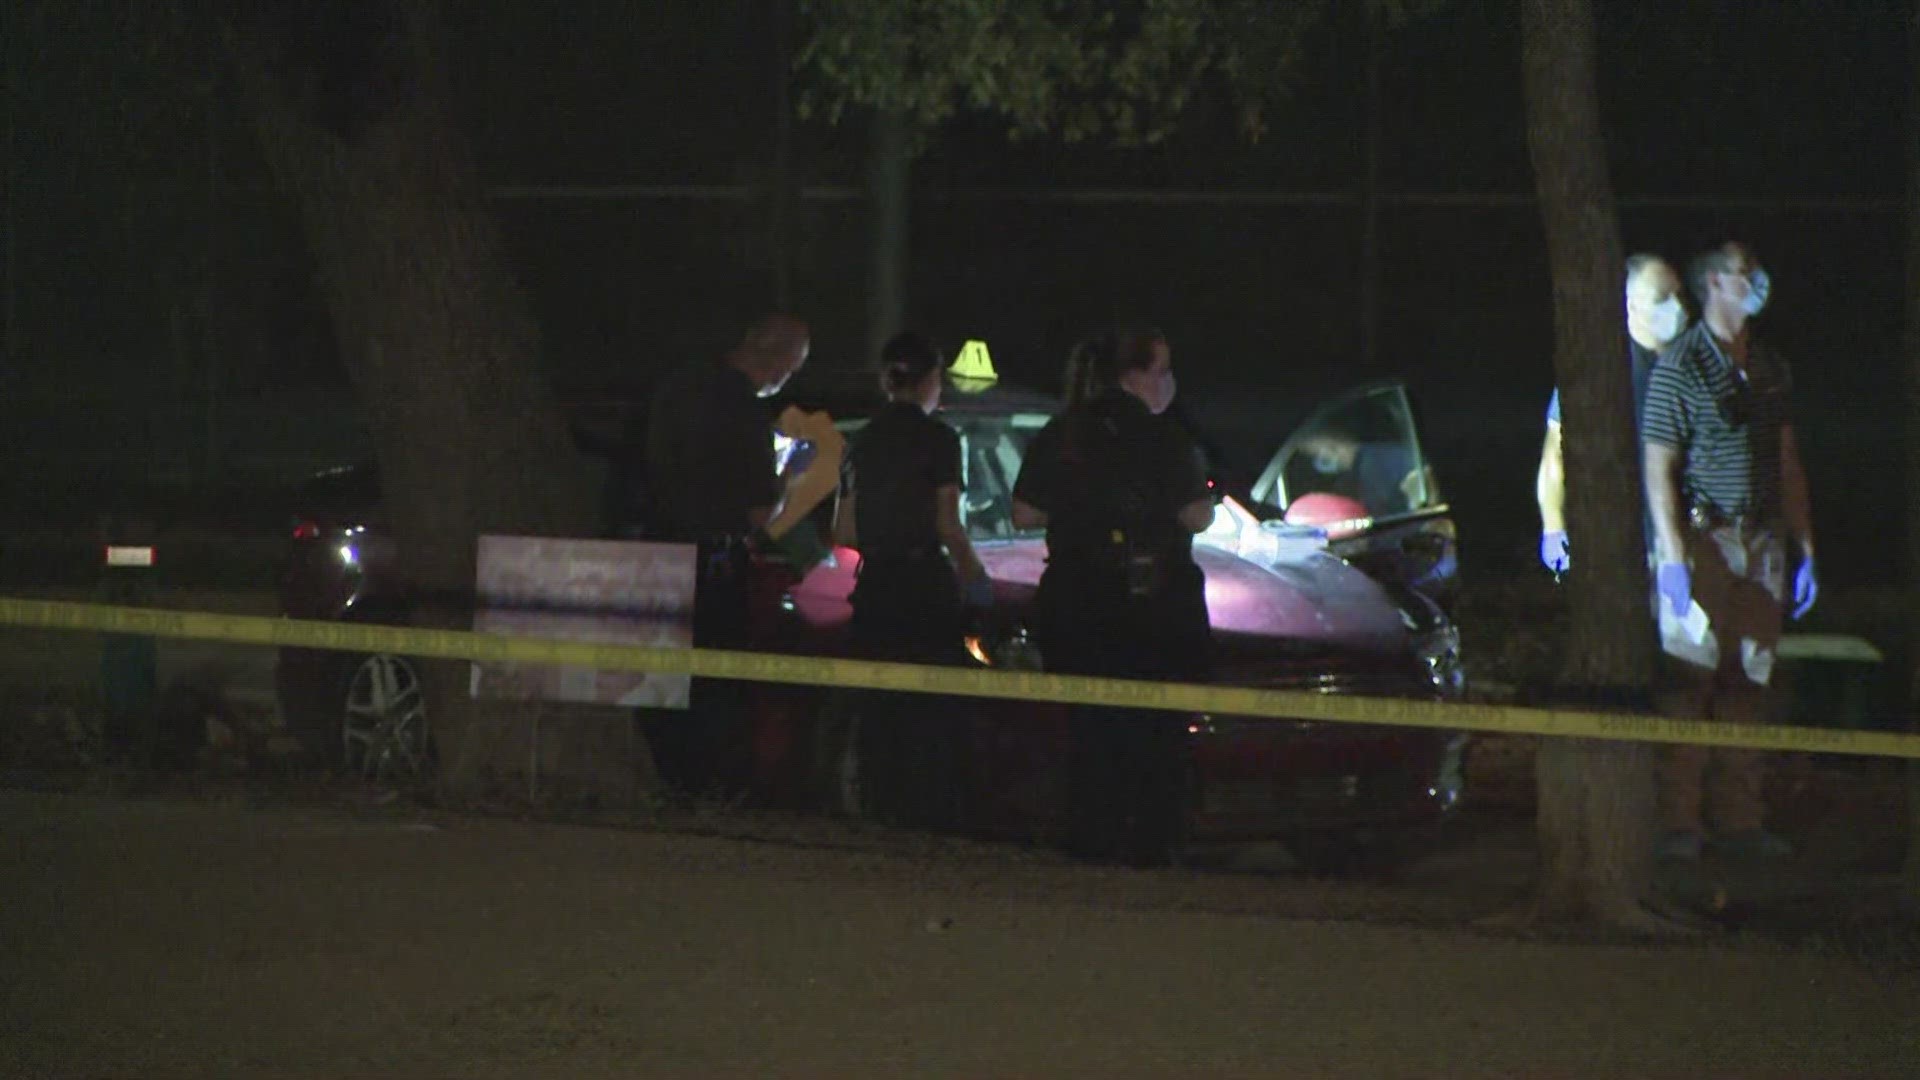 Police are investigating after a man was found dead inside a car in South Austin.